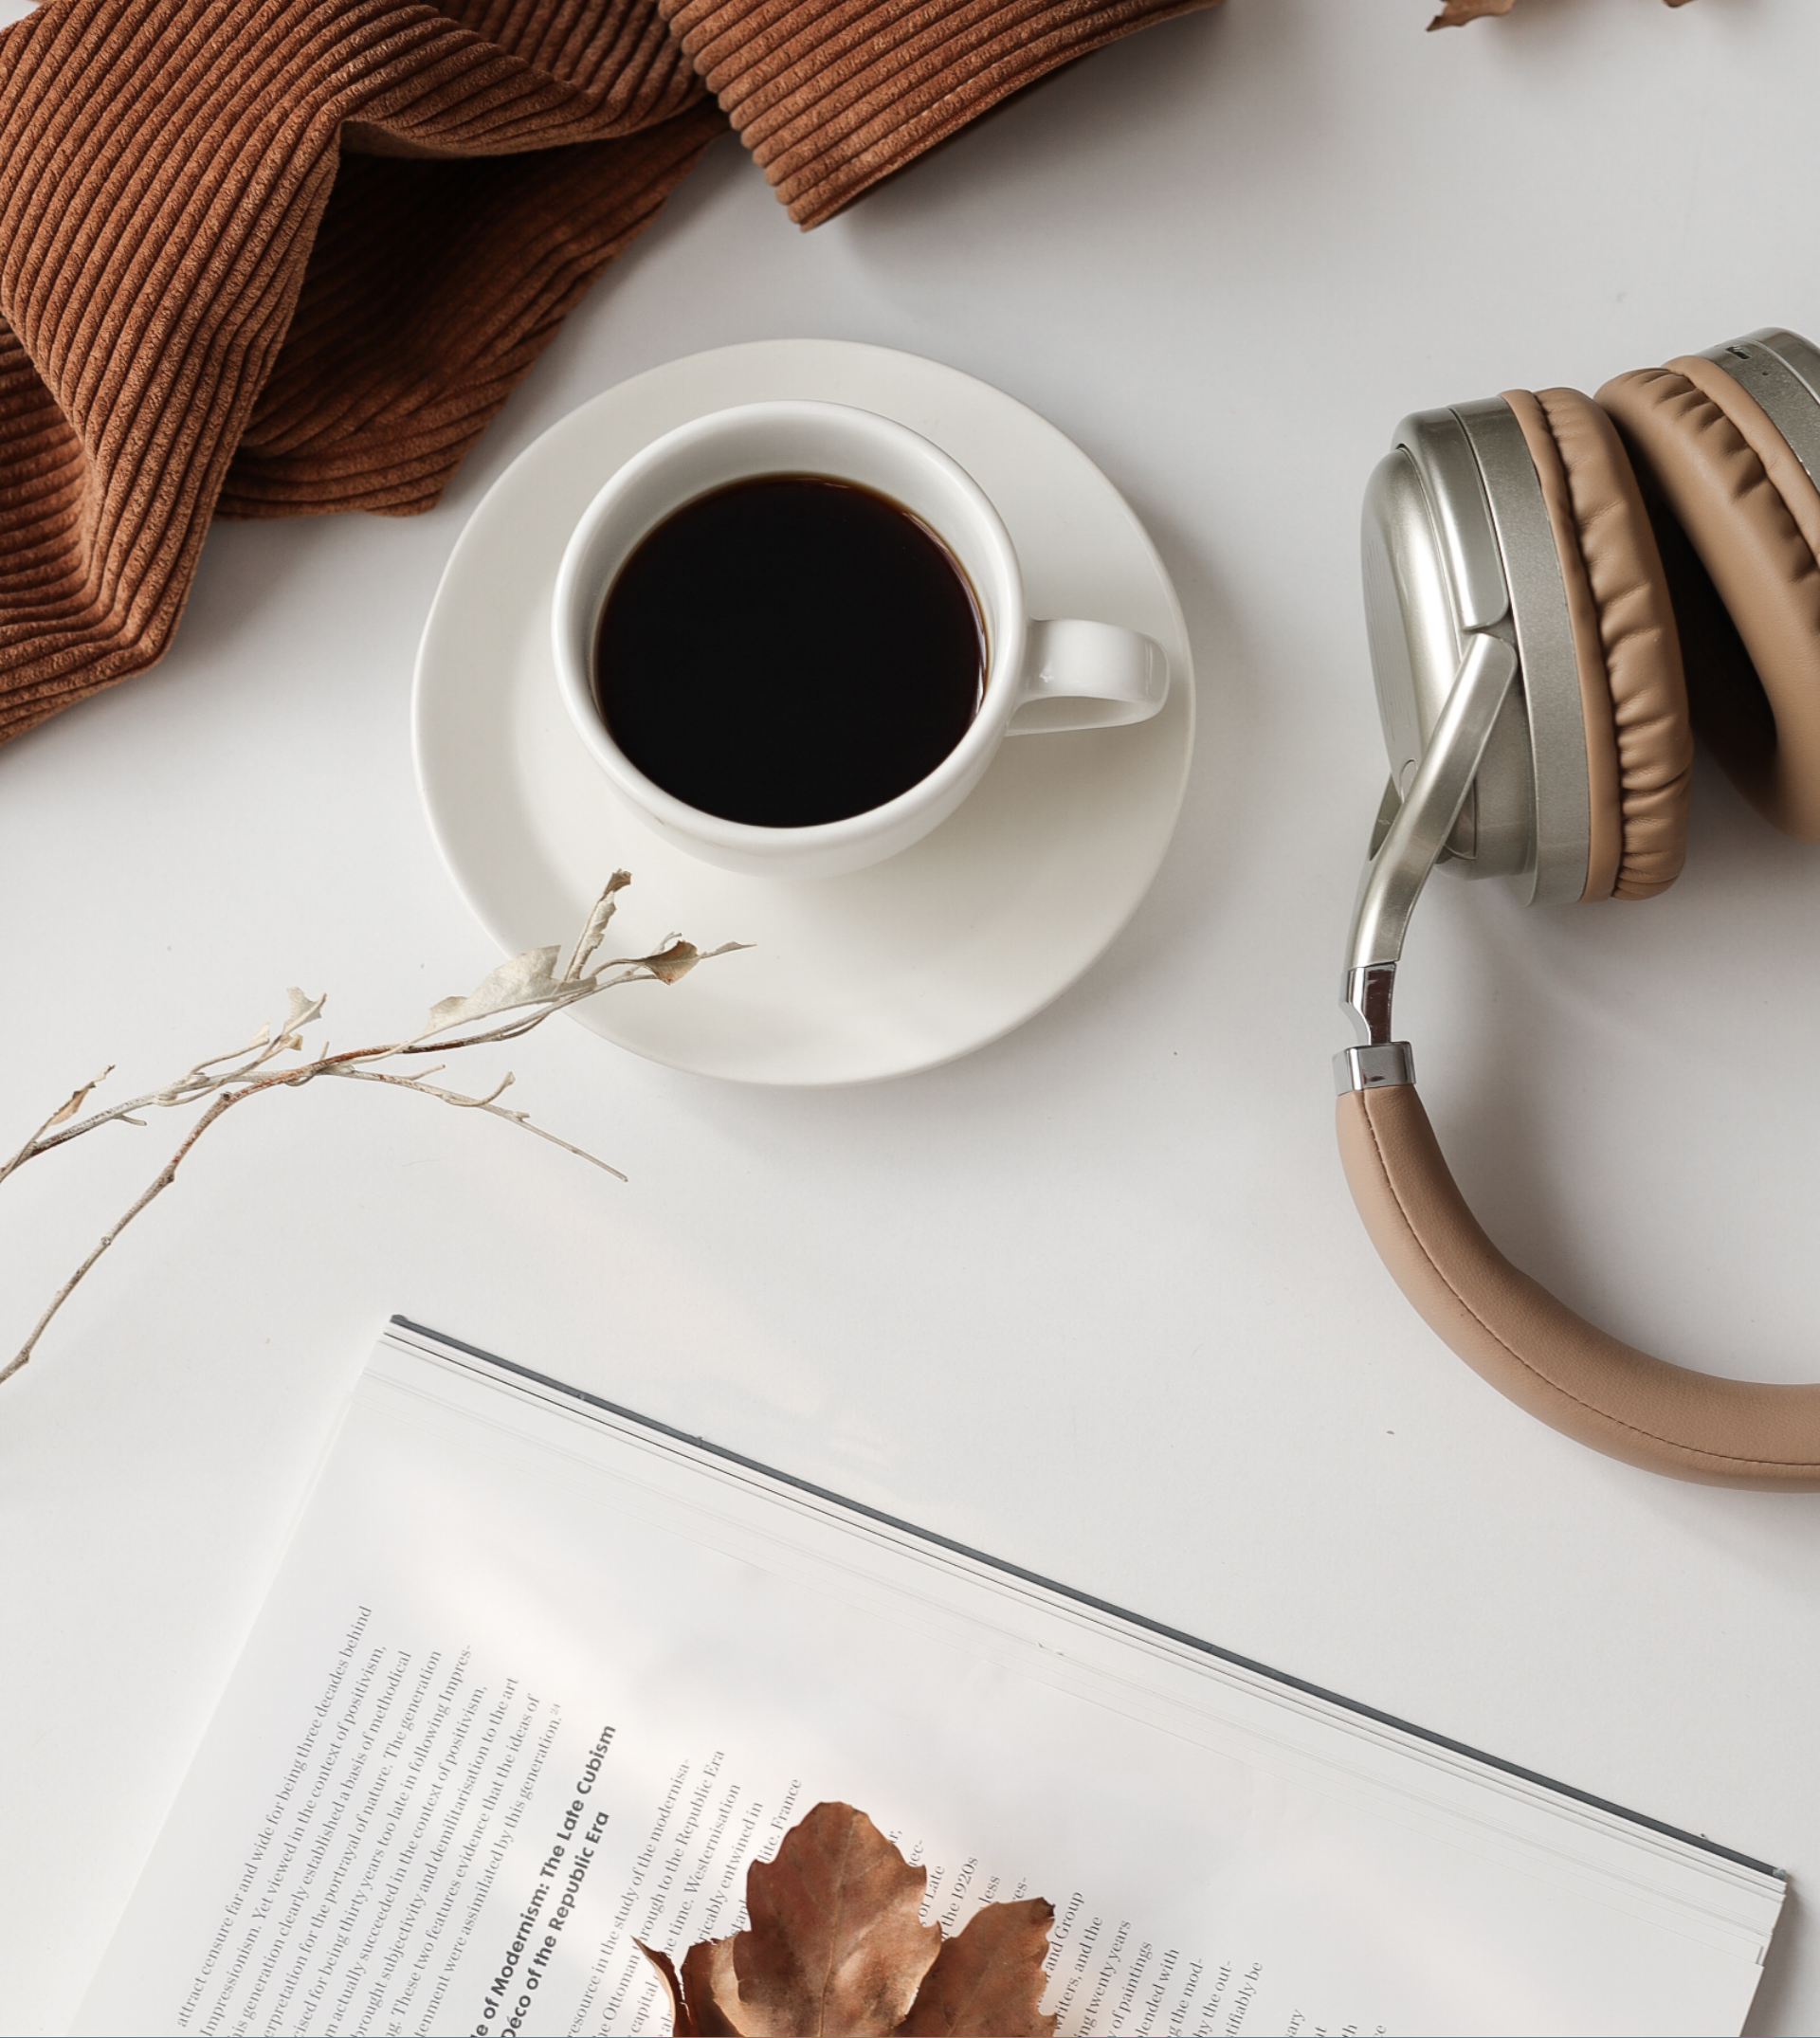 Close-Up View of Cup of Coffee and Headphones on Desk